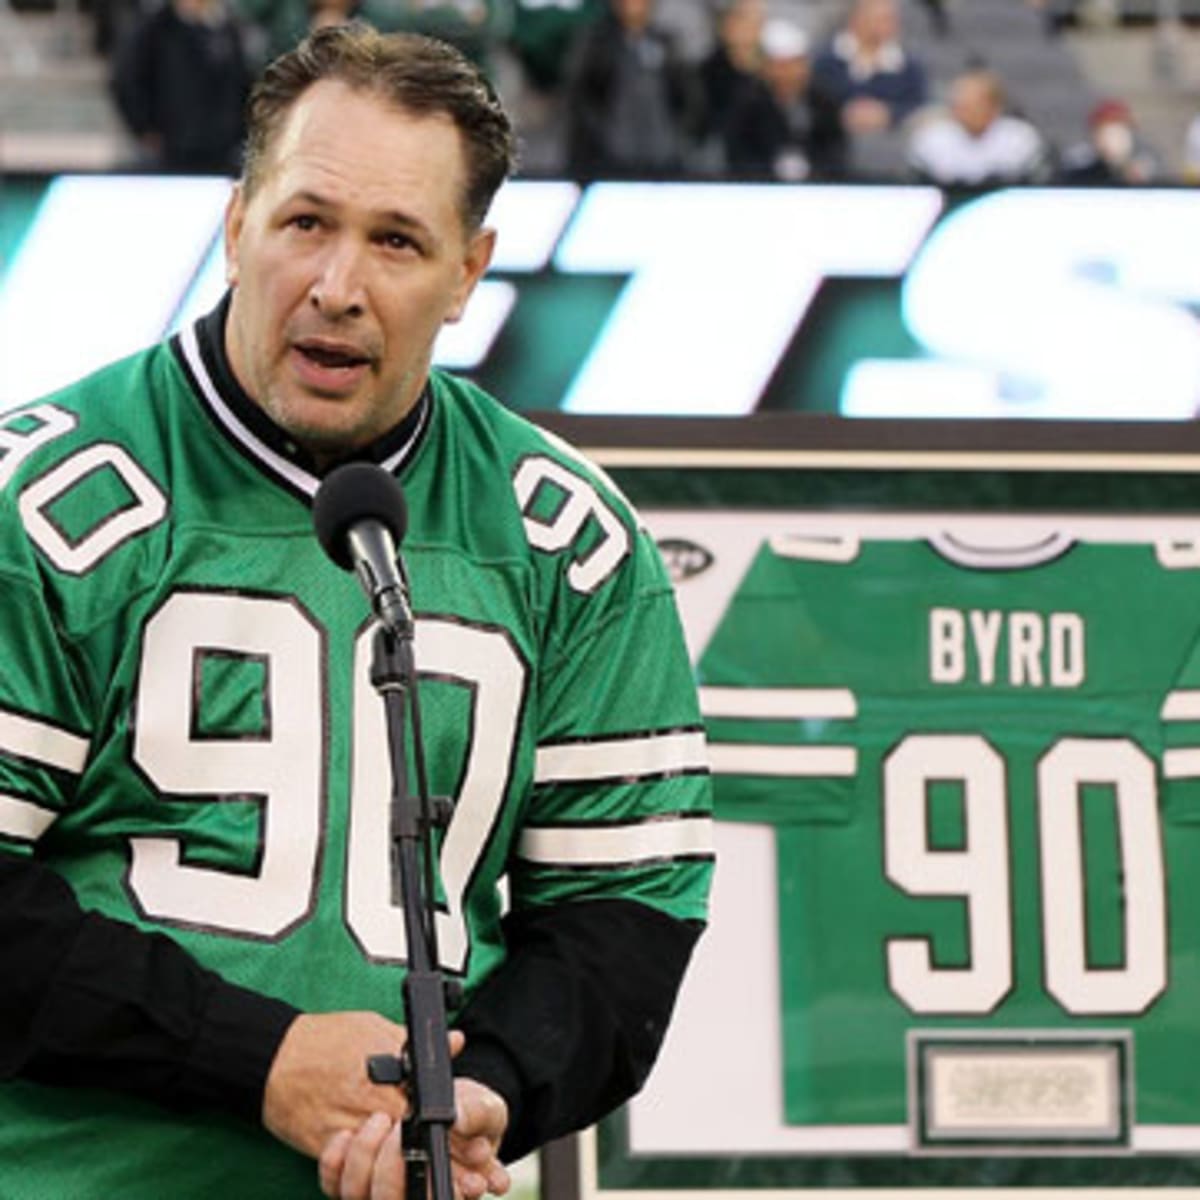 Dennis Byrd of the New York Jets looks on while there's a break in